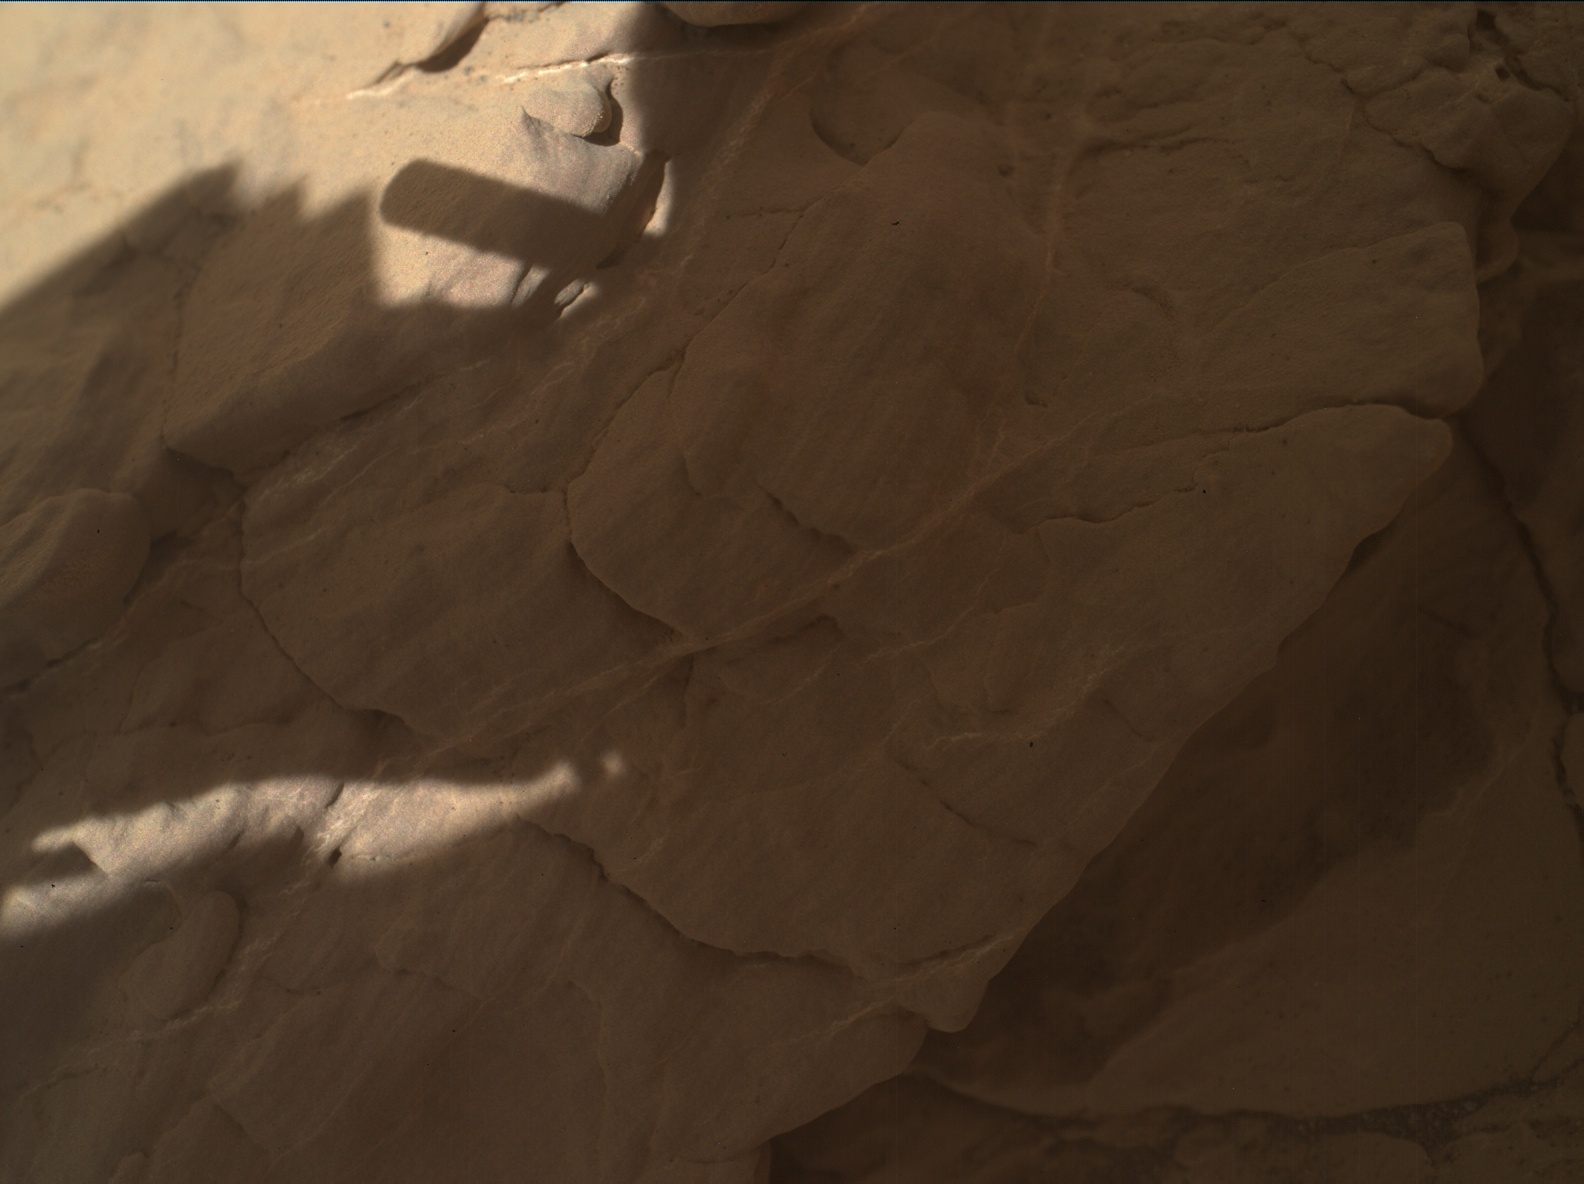 Nasa's Mars rover Curiosity acquired this image using its Mars Hand Lens Imager (MAHLI) on Sol 2604